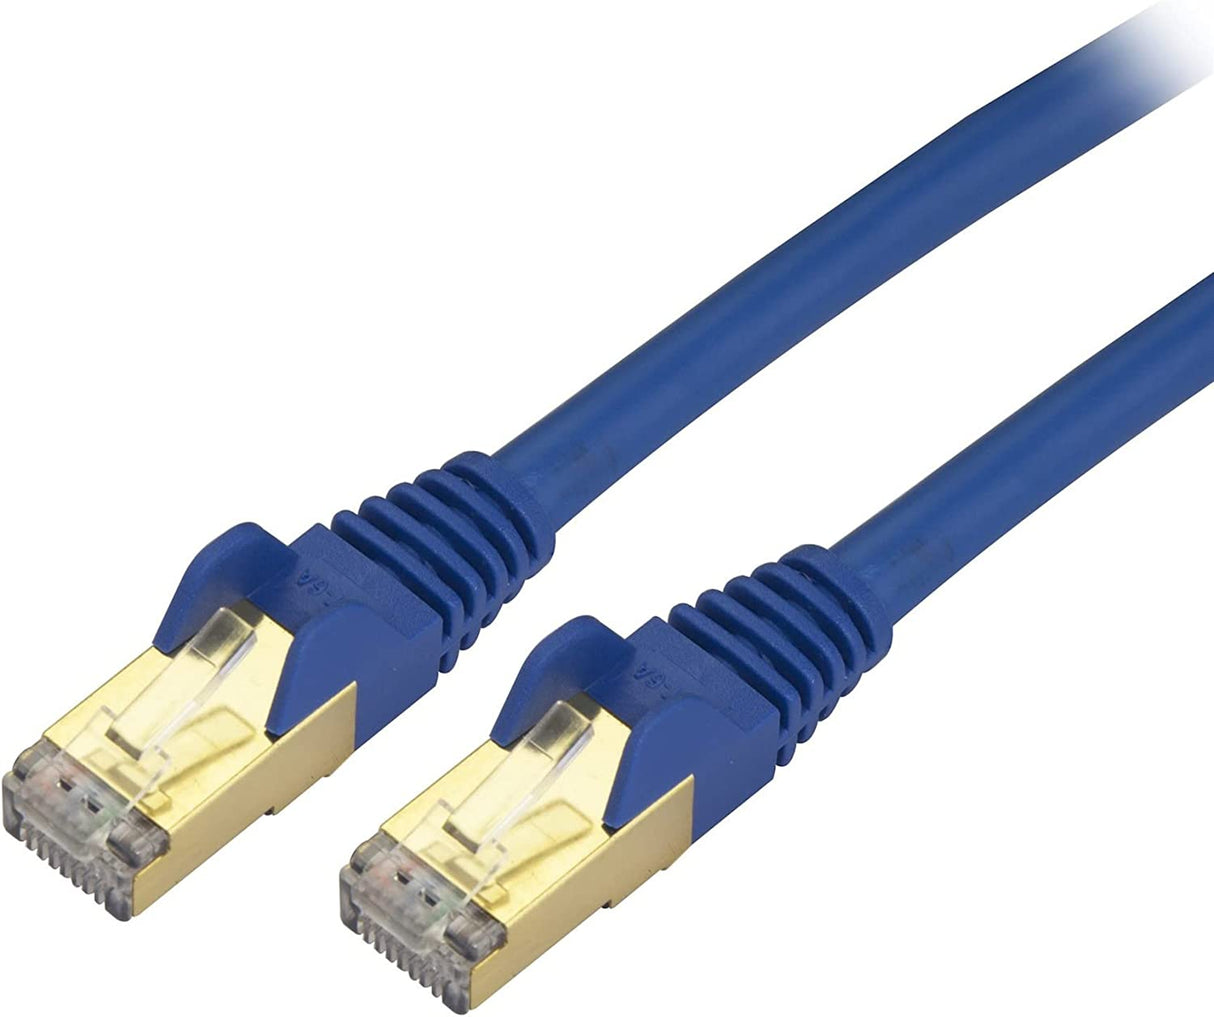 StarTech.com 14ft CAT6a Ethernet Cable - 10 Gigabit Shielded Snagless RJ45 100W PoE Patch Cord - 10GbE STP Network Cable w/Strain Relief - Blue Fluke Tested/Wiring is UL Certified/TIA (C6ASPAT14BL) 14 ft Blue